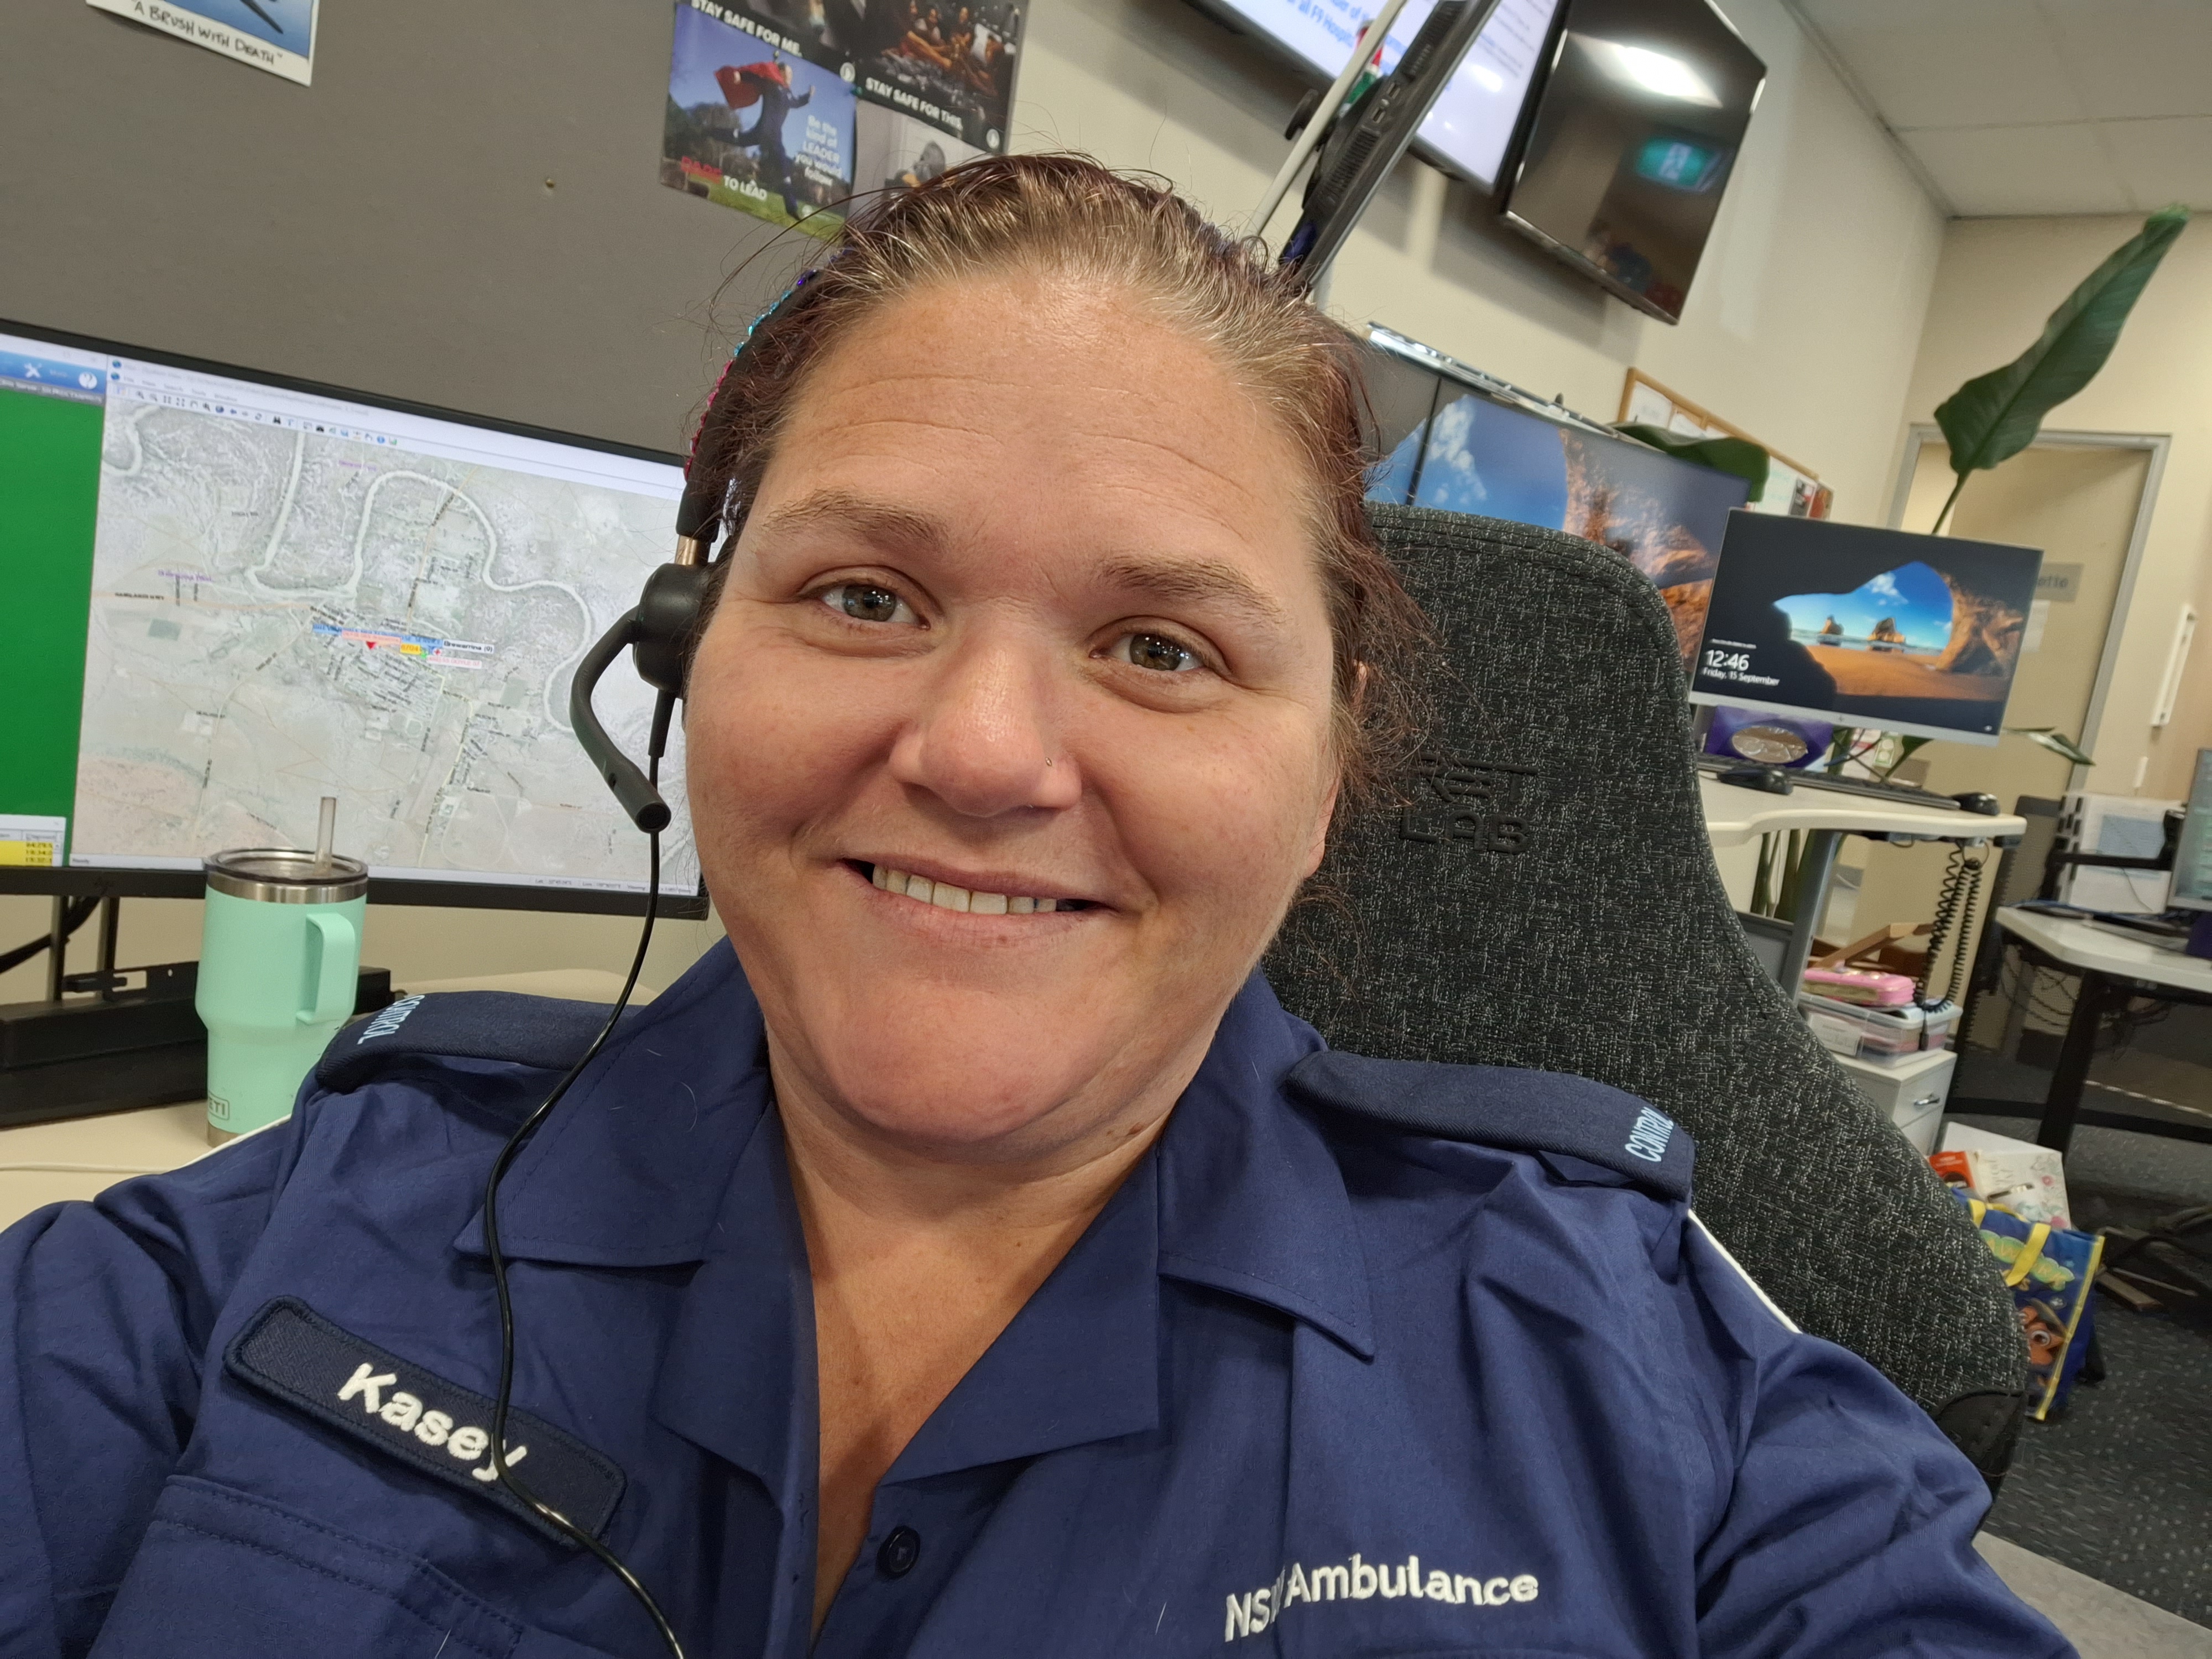  Two of NSW Ambulance’s amazing Clinical Volunteers have followed their dreams to join the ranks of our paid staff – one as a paramedic intern, the other as an emergency medical call taker.